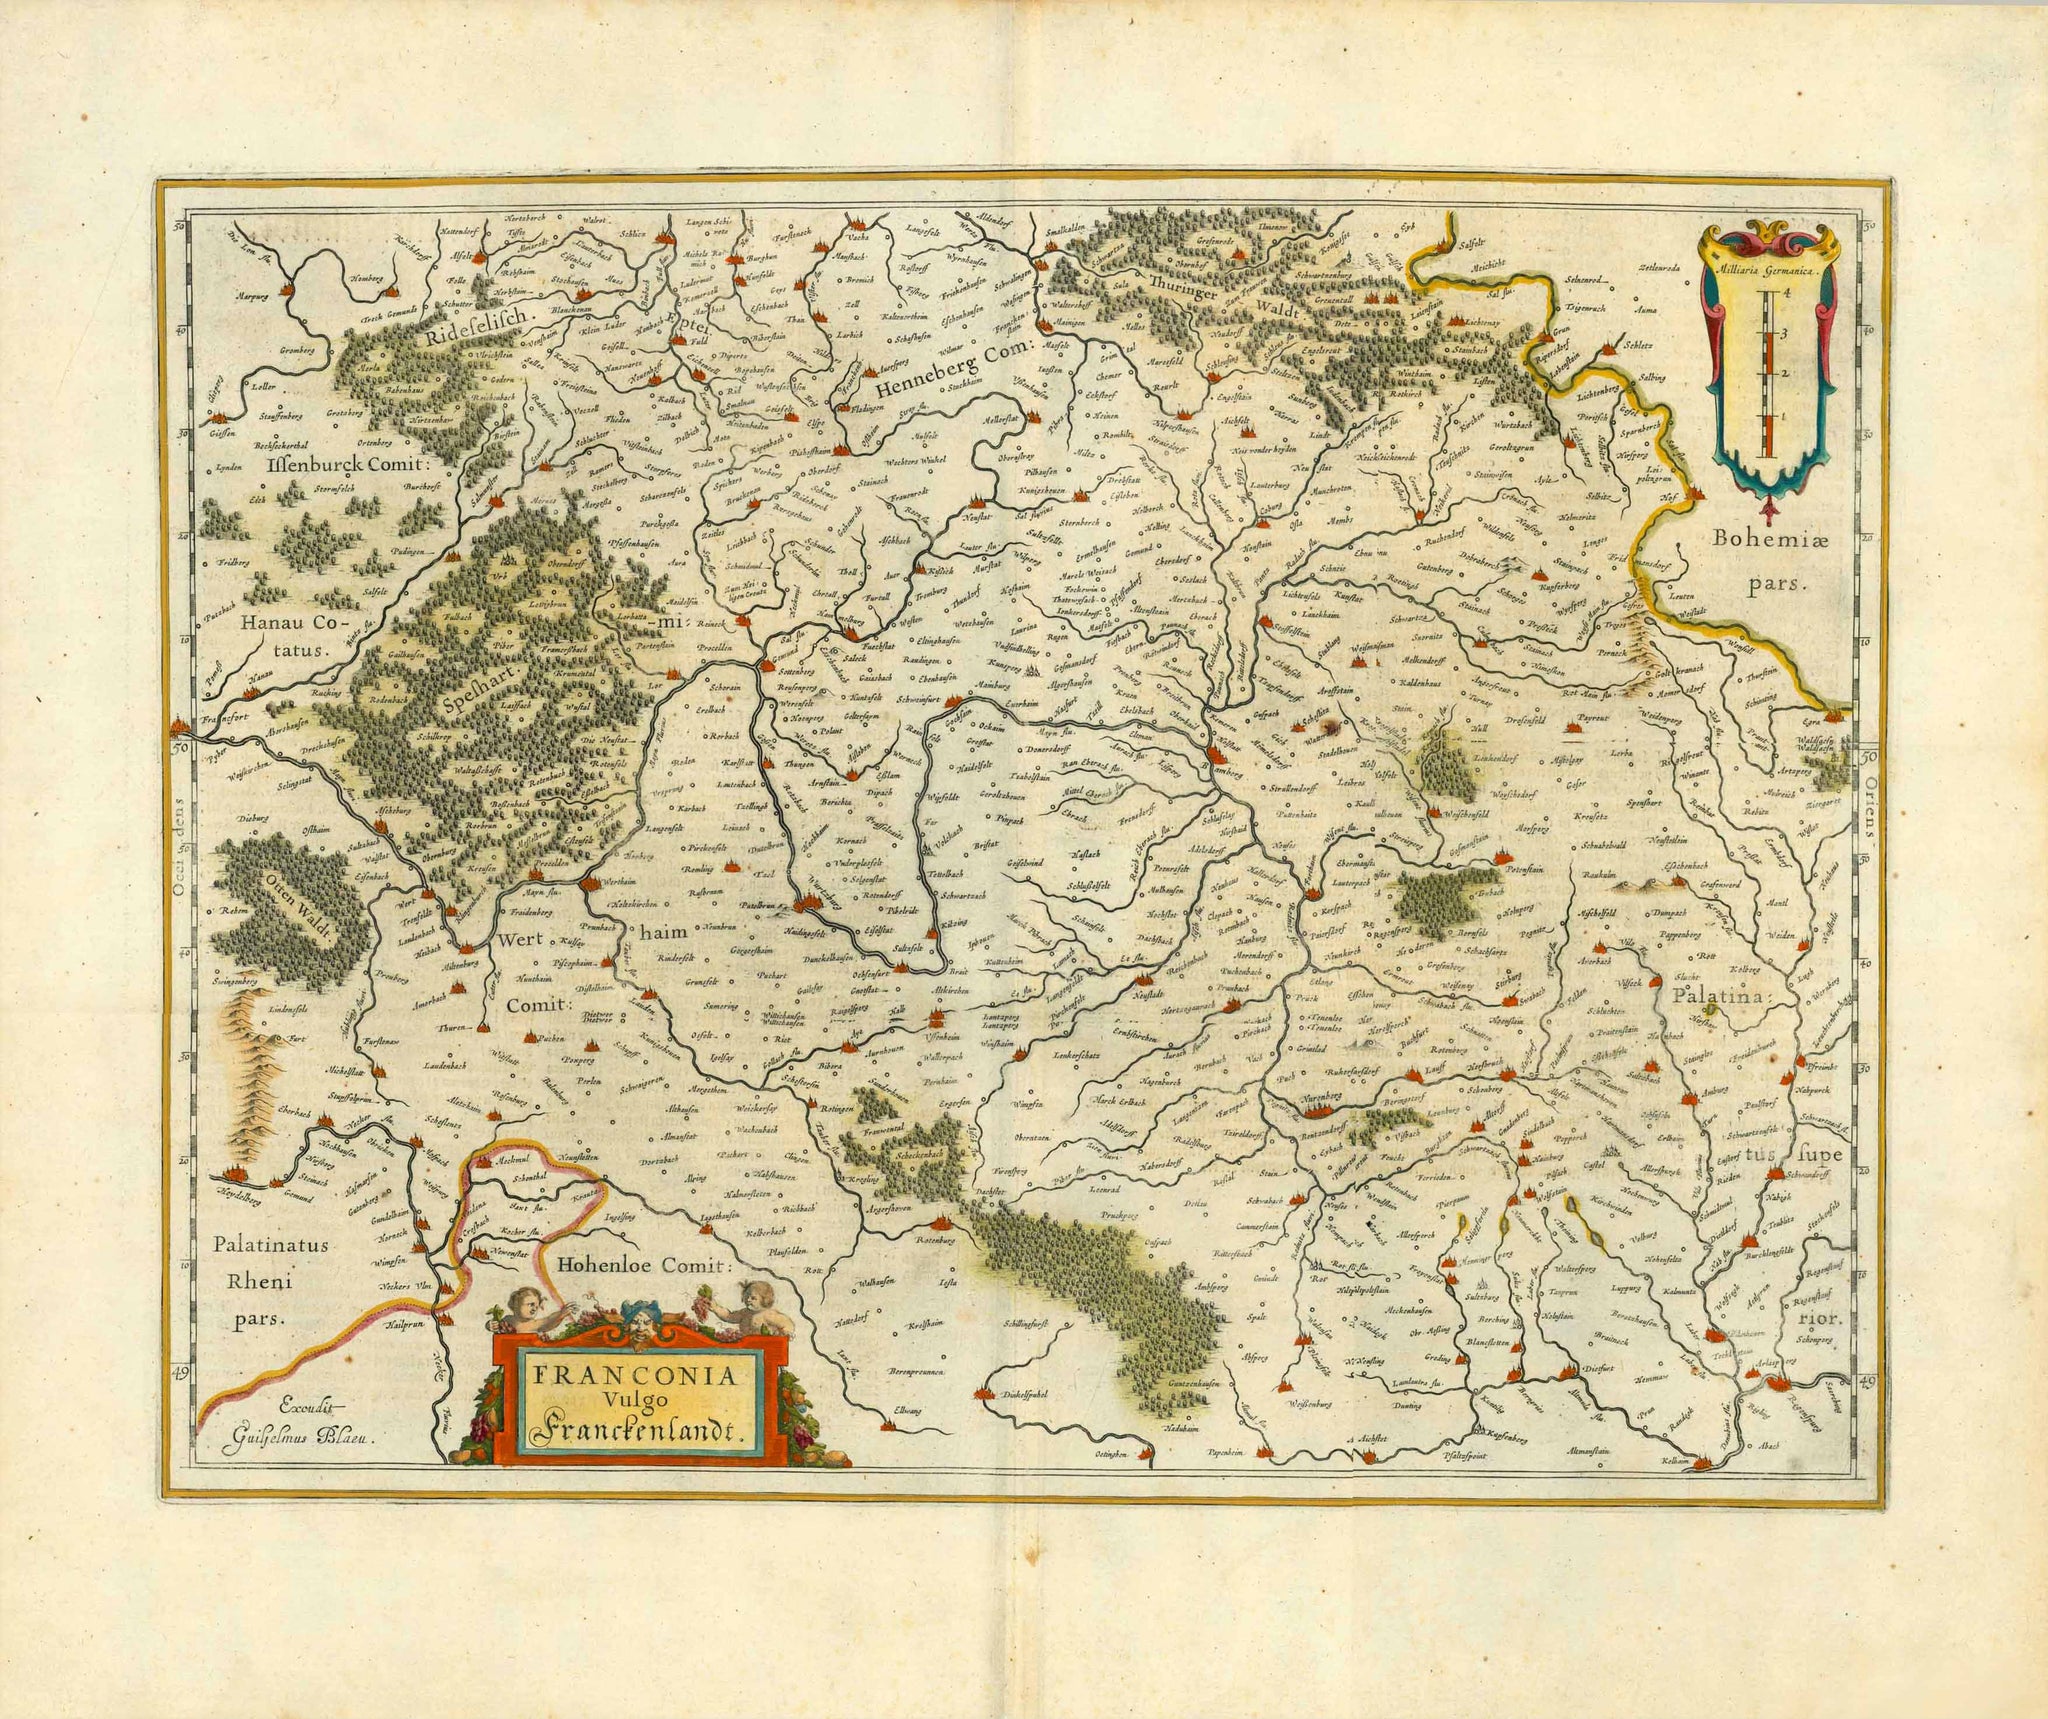 Copper engraving map by Guillaume Bleau ca 1635. Text on the reverse side in German.  In the upper right of the map is the Saal River with the towns of Hof and Egra. In the lower right is Regensburg and Kehlheim on the Danube River. In the middle of the left margin is Frankfurt on the Main River.  In the lower left is Heilbrunn and Neckarsulm.